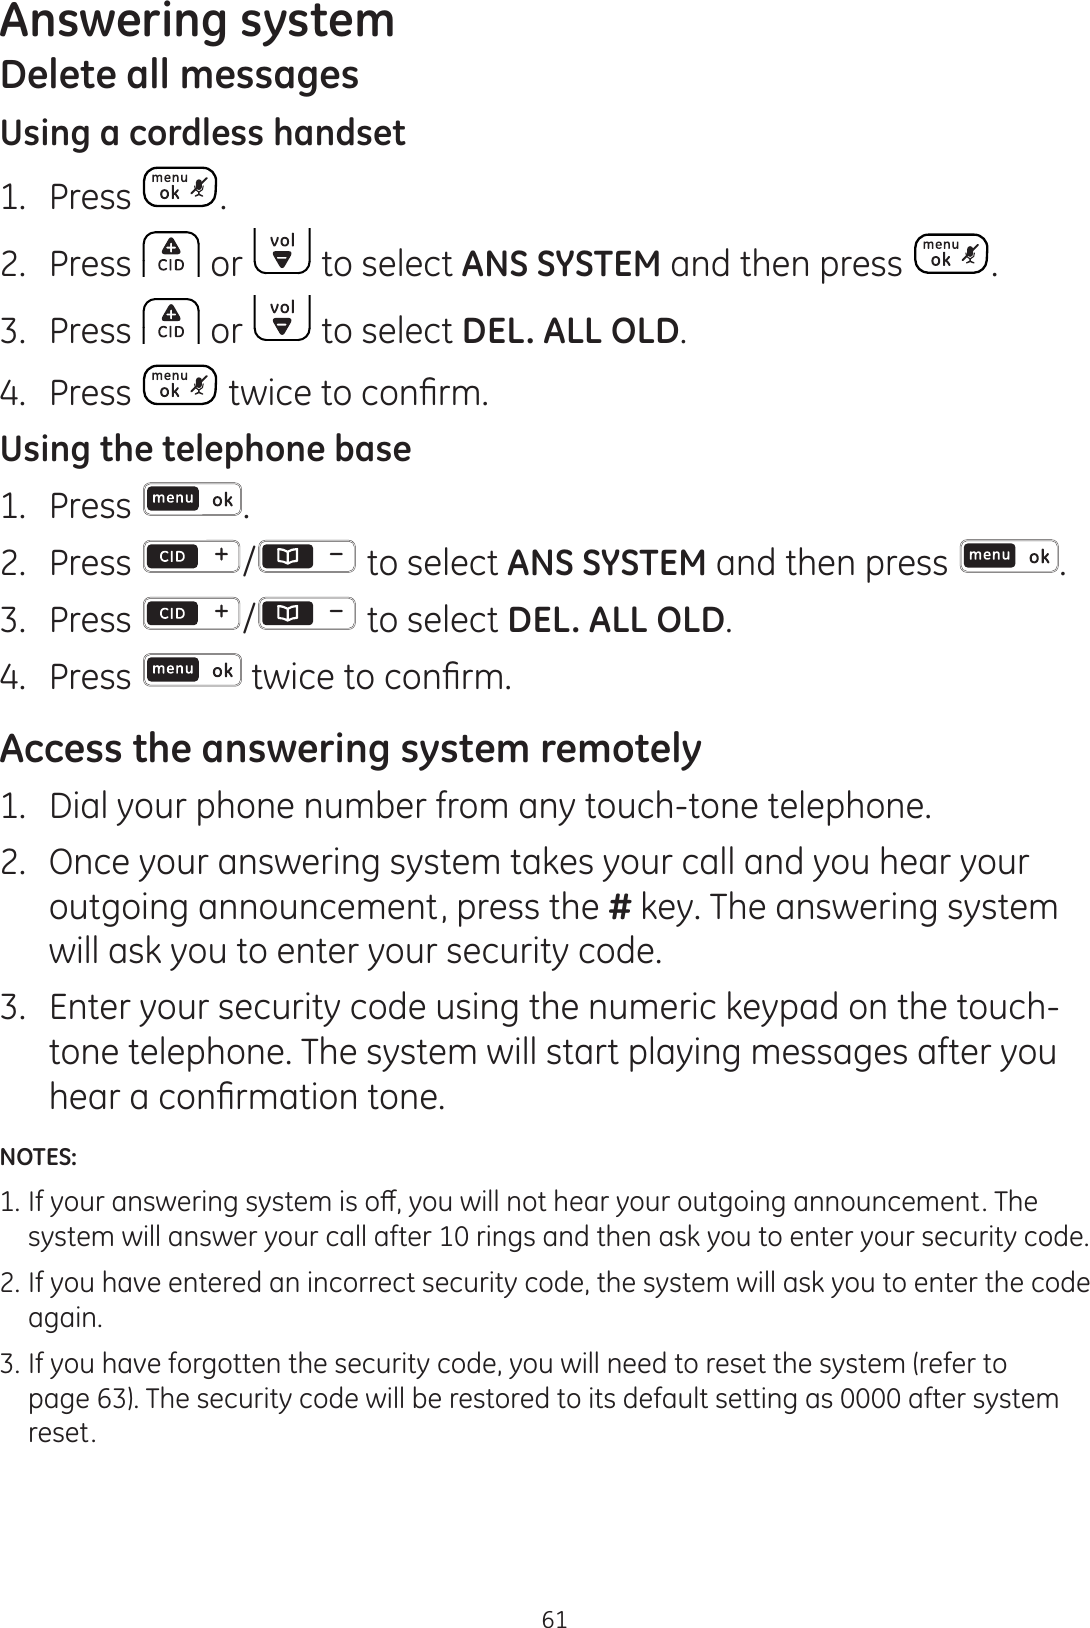 Answering system61Delete all messagesUsing a cordless handset1.  Press .2.  Press   or   to select ANS SYSTEM and then press  . 3.  Press   or   to select DEL. ALL OLD.4.  Press  WZLFHWRFRQ¿UPUsing the telephone base1.  Press  .2.  Press  /  to select ANS SYSTEM and then press  . 3.  Press  / to select DEL. ALL OLD.4.  Press  WZLFHWRFRQ¿UPAccess the answering system remotely1.   Dial your phone number from any touch-tone telephone.2.   Once your answering system takes your call and you hear your outgoing announcement, press the # key. The answering system will ask you to enter your security code.3.   Enter your security code using the numeric keypad on the touch-tone telephone. The system will start playing messages after you KHDUDFRQ¿UPDWLRQWRQHNOTES: ,I\RXUDQVZHULQJV\VWHPLVRȺ\RXZLOOQRWKHDU\RXURXWJRLQJDQQRXQFHPHQW7KH  system will answer your call after 10 rings and then ask you to enter your security code.2. If you have entered an incorrect security code, the system will ask you to enter the code    again.3. If you have forgotten the security code, you will need to reset the system (refer to    page 63). The security code will be restored to its default setting as 0000 after system    reset. 